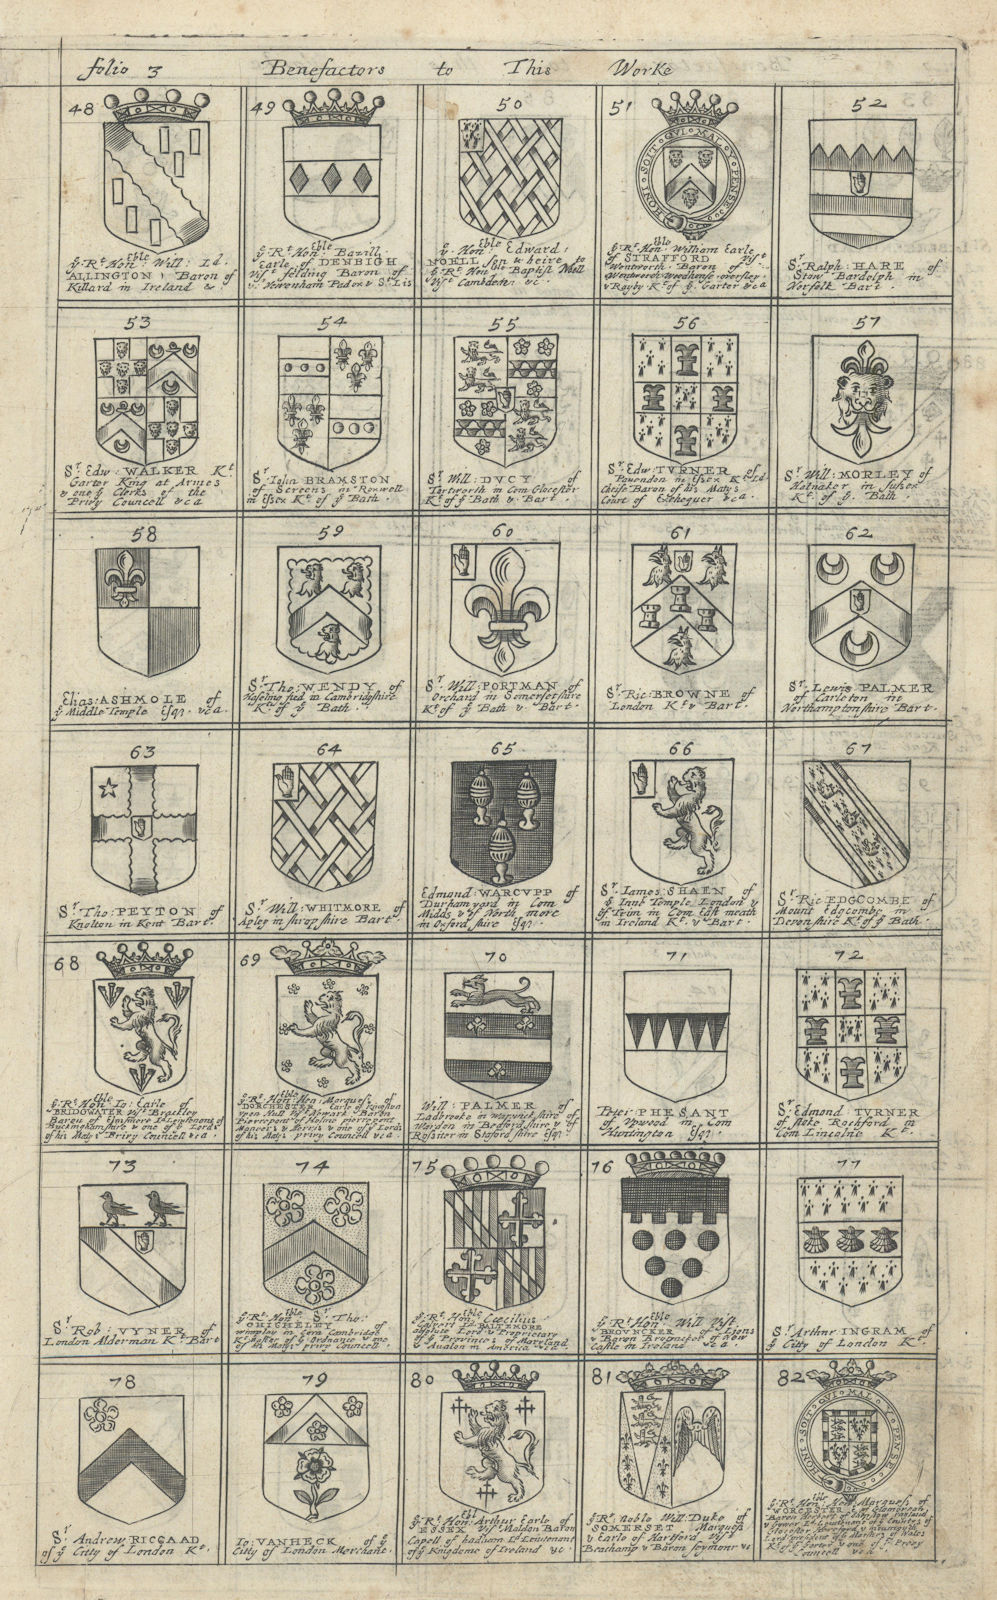 Associate Product Family coats of arms of benefactors to Blome's Britannia. Folio 3 #48-82 1673